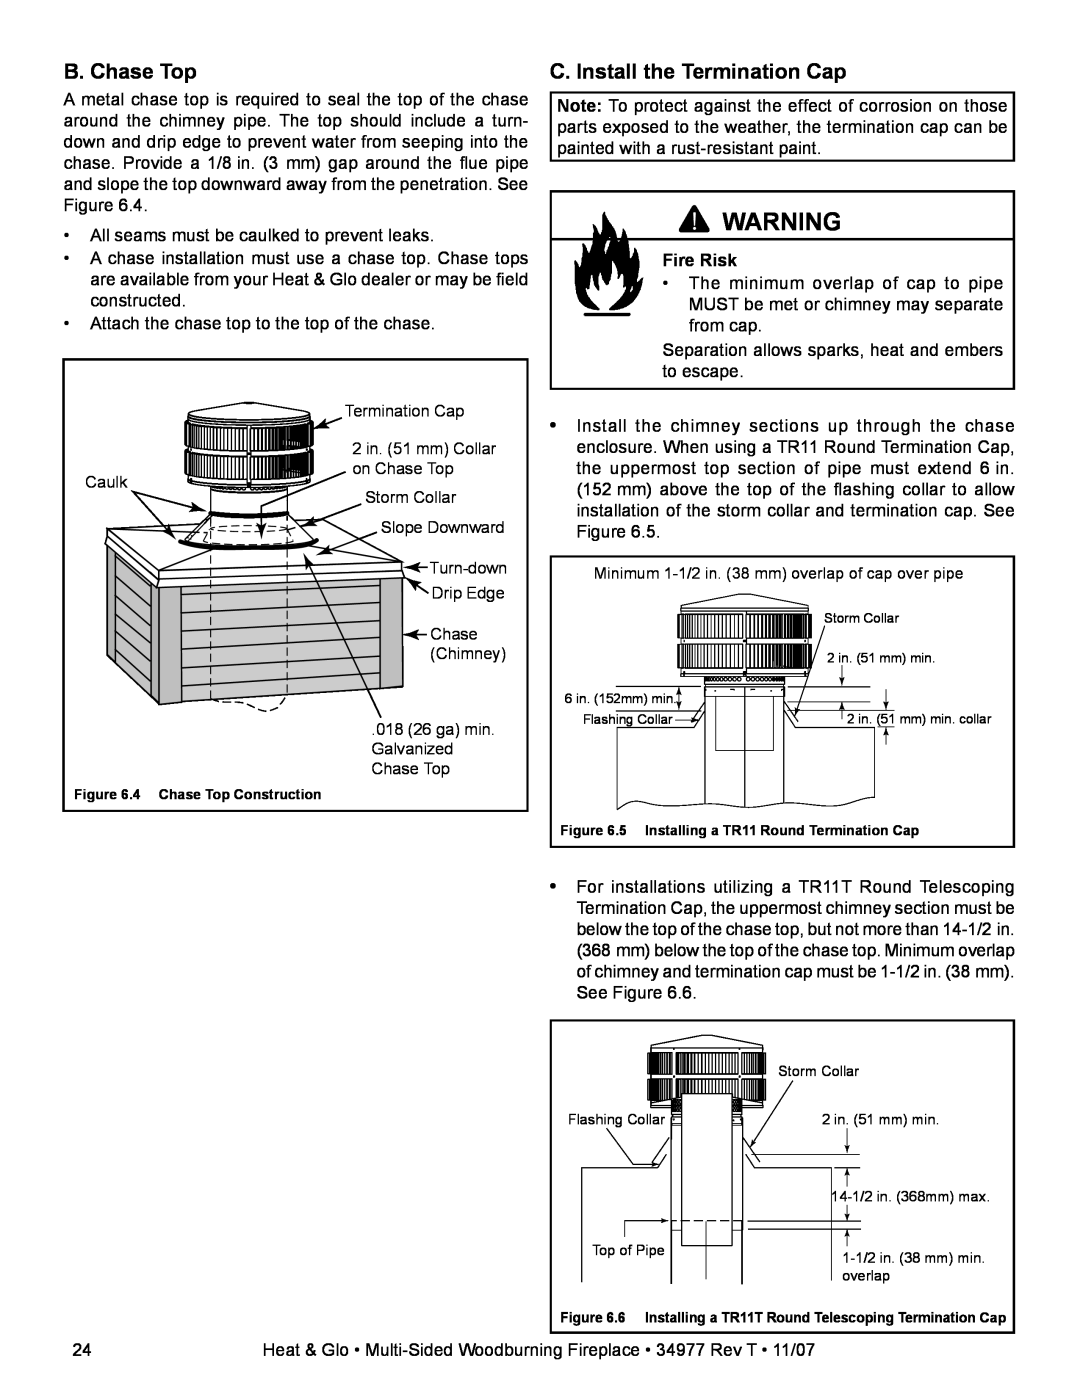 Heat & Glo LifeStyle BAY-40 owner manual B. Chase Top, C. Install the Termination Cap, Fire Risk, Caulk 